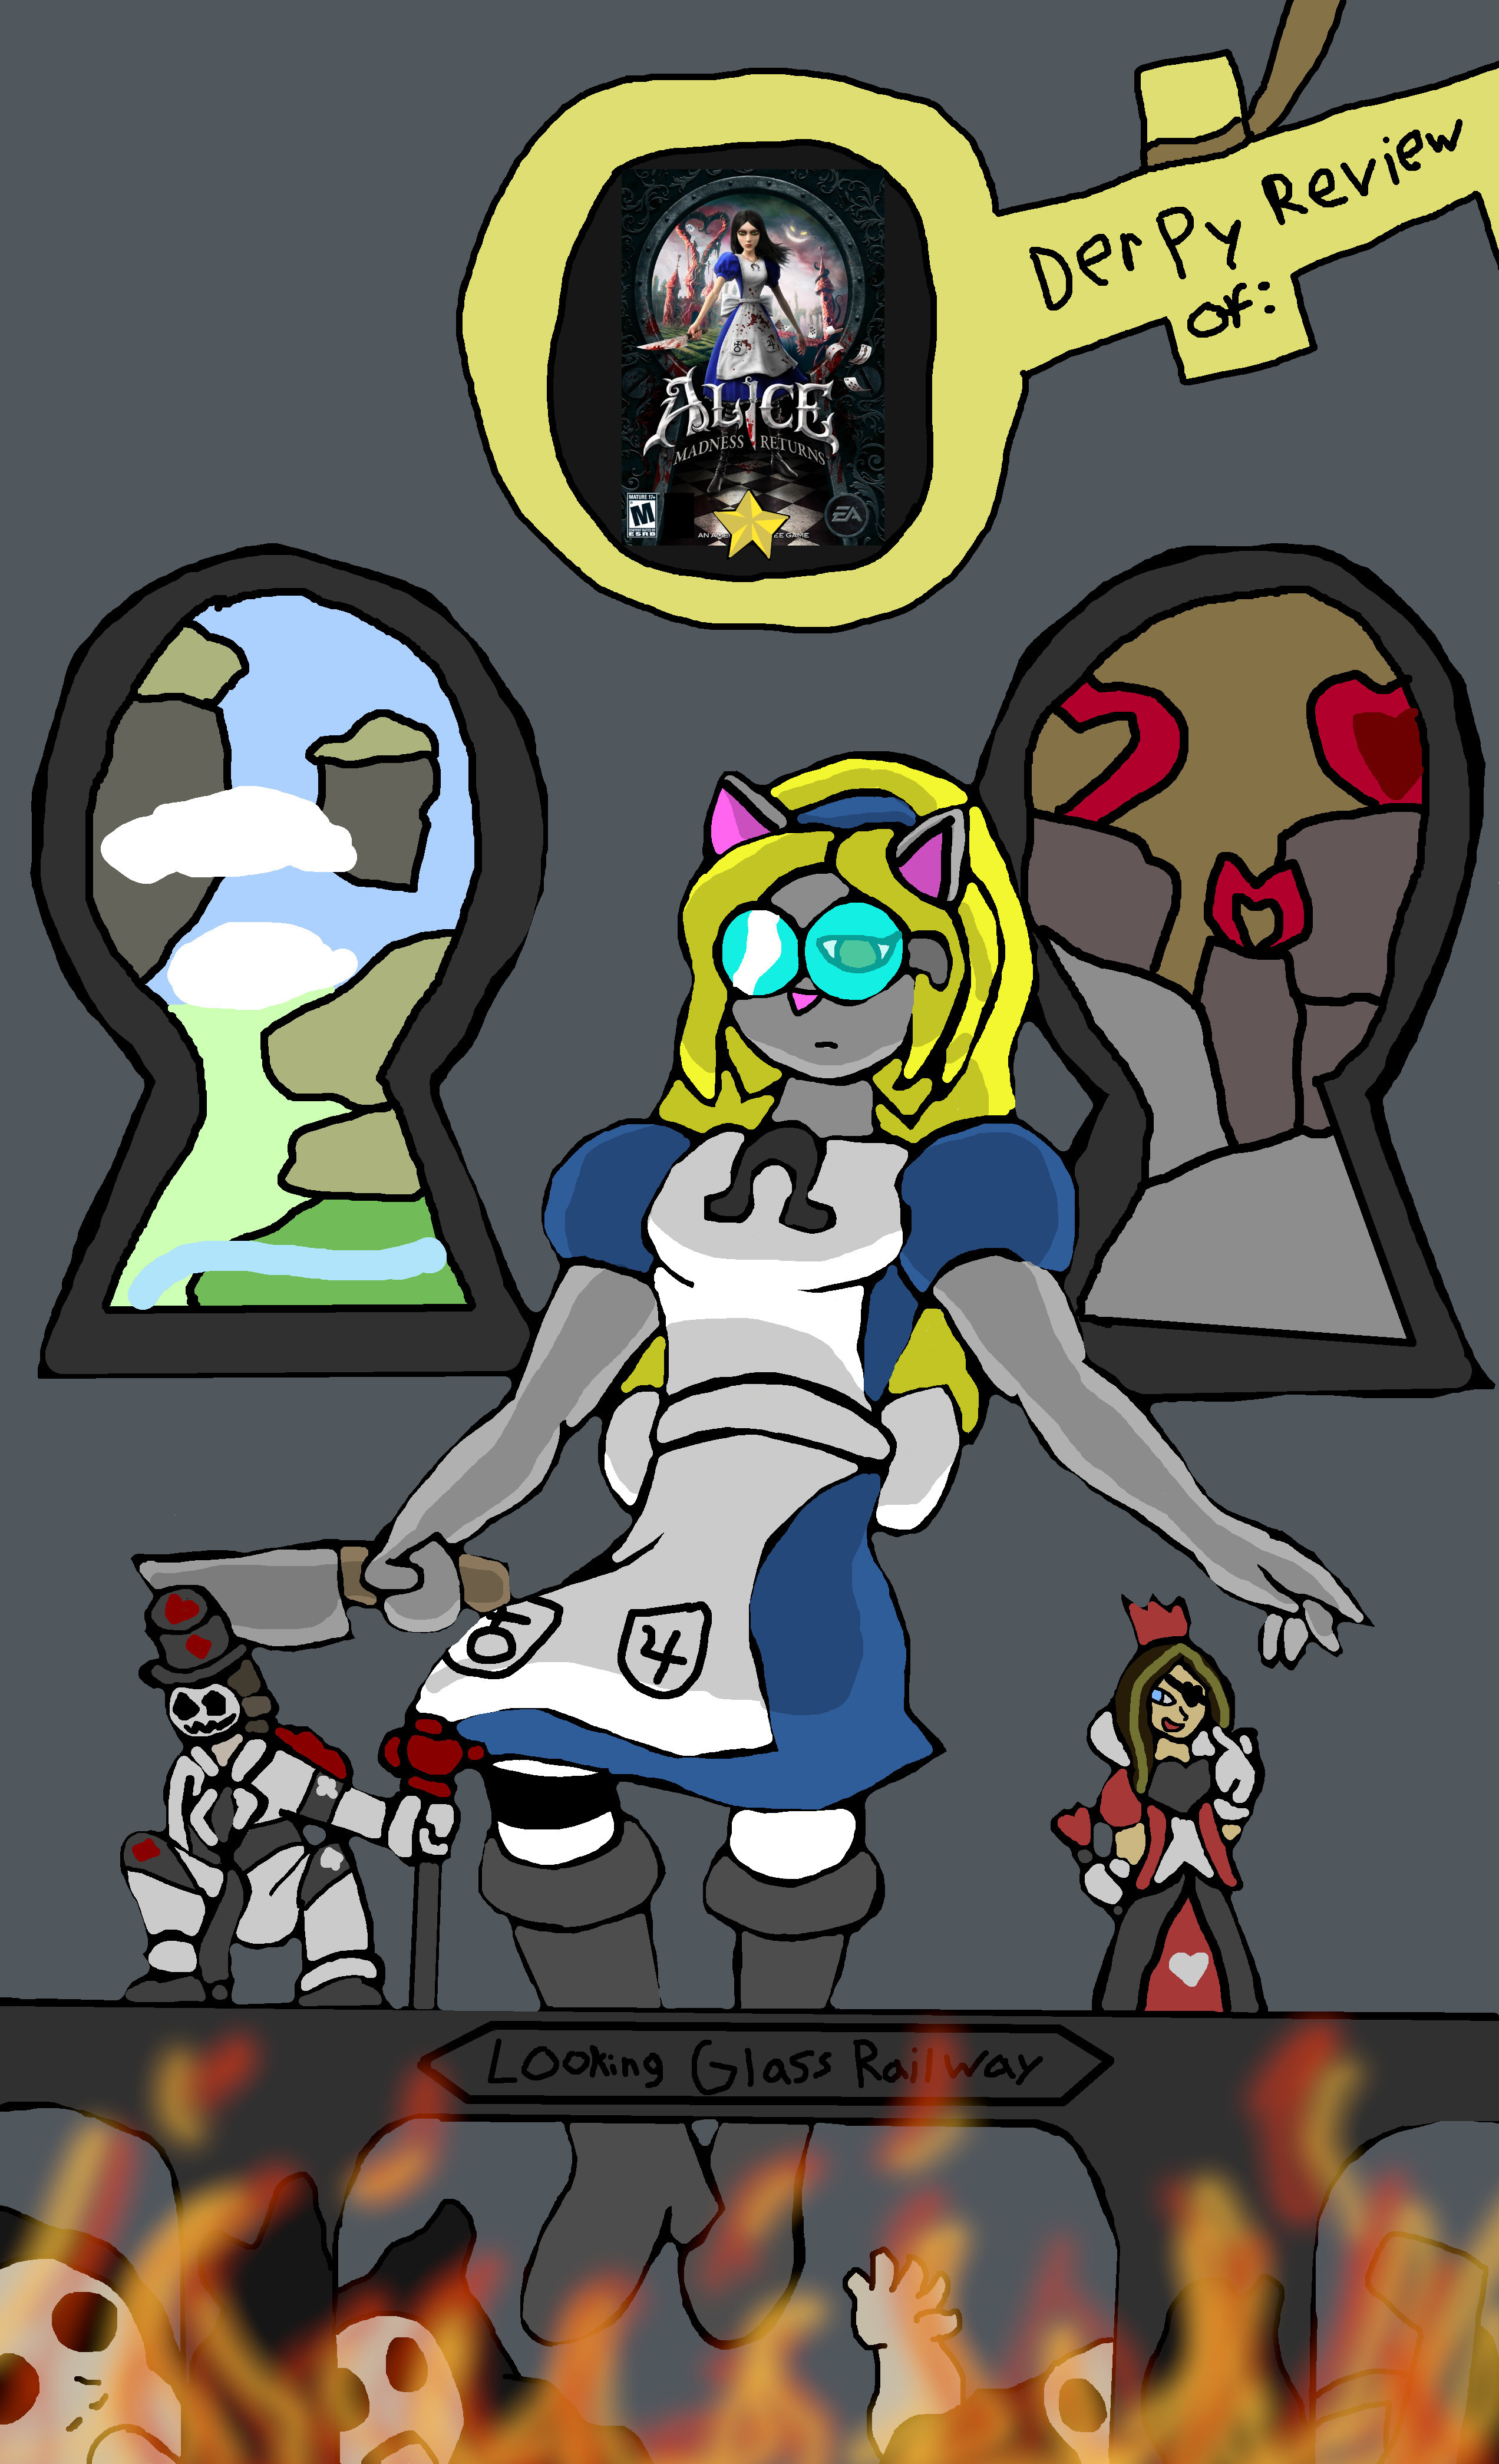 Derpy Review #79: Alice: Madness Returns by MicroGamer1 on DeviantArt